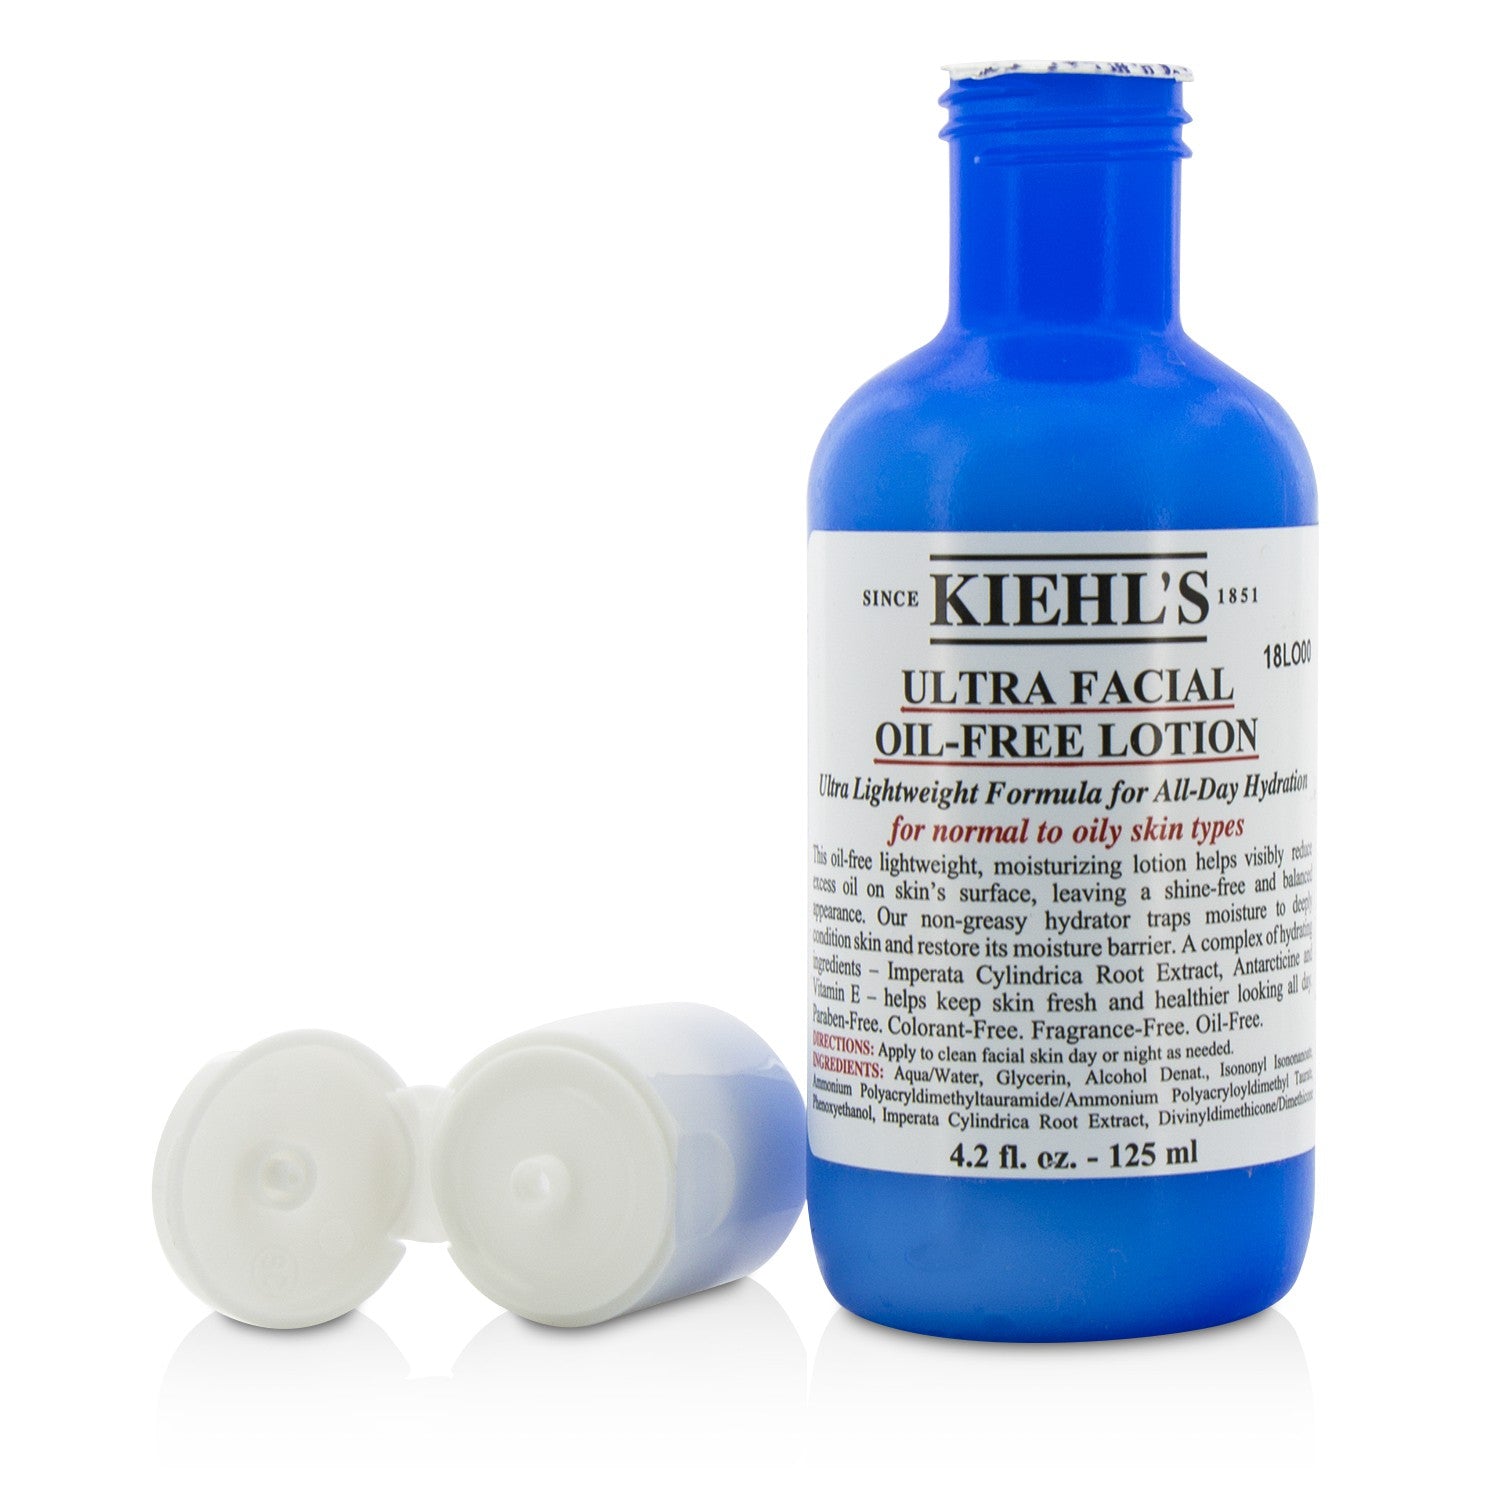 radioaktivitet tro måske Ultra Facial Oil-Free Lotion - For Normal to Oily Skin Types for Sale |  Kiehl's, Skincare, Buy Now – Author